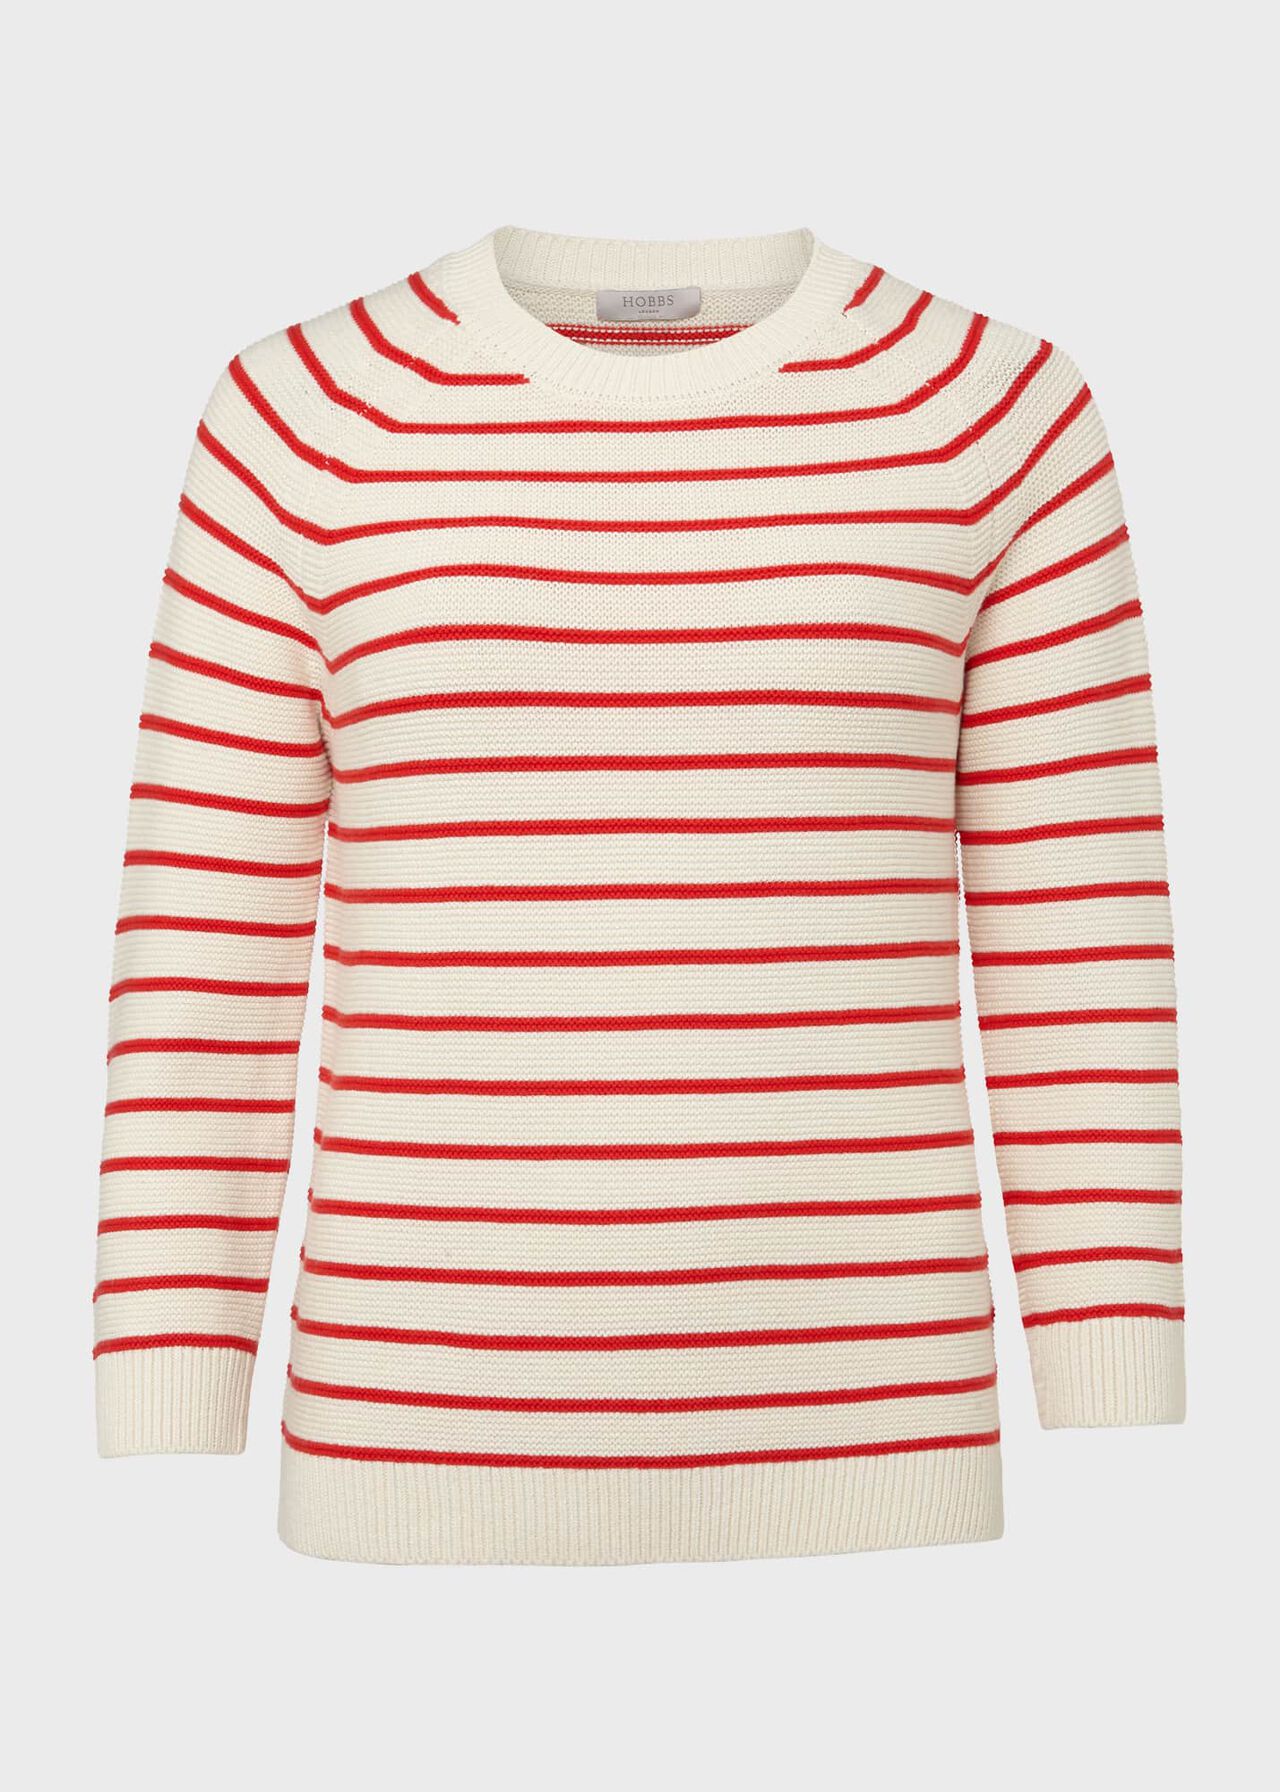 Abigail Cotton Stripe Sweater, Ivory Flame Red, hi-res